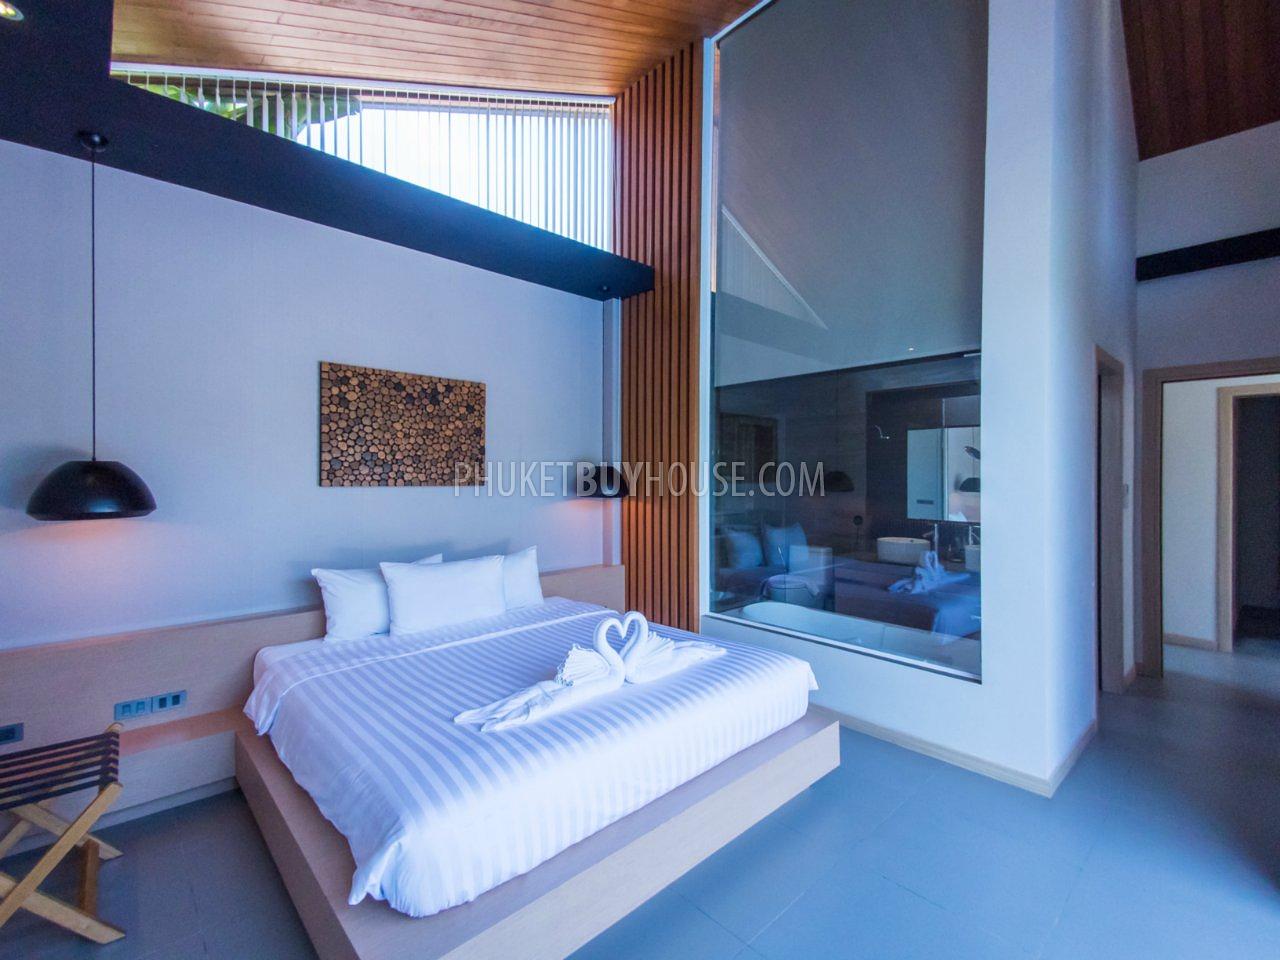 LAY4522: Tropical modern villa with 2 bedrooms in Layan. Photo #7